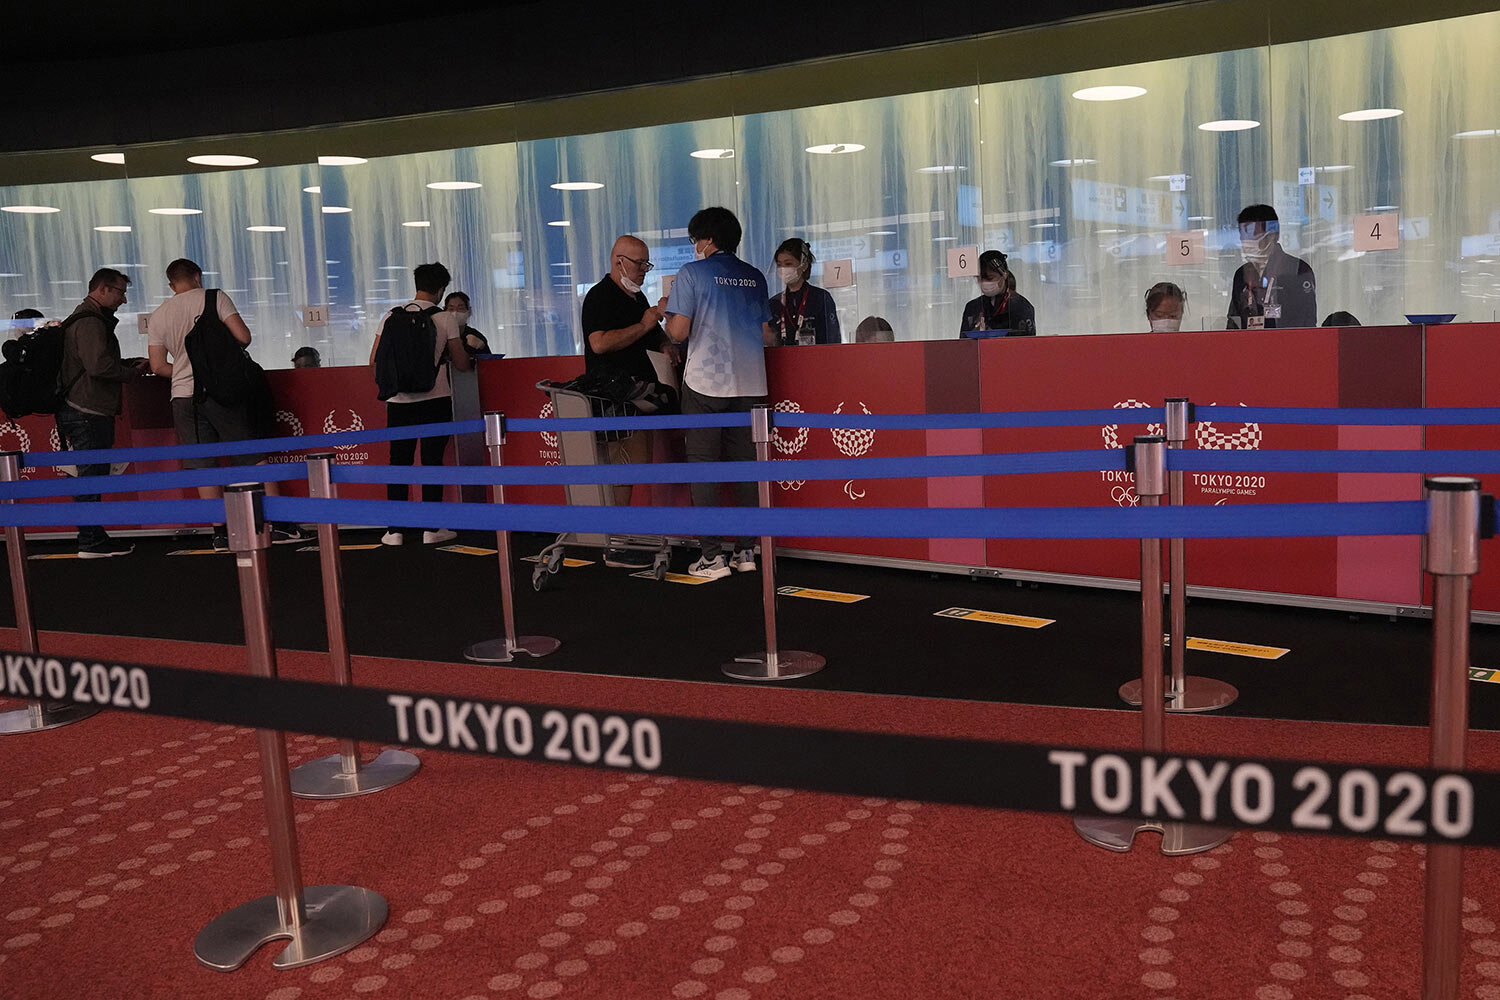  People arriving for the 2020 Summer Olympics wait for their credentials to be validated before they can leave Haneda Airport in Tokyo, Monday, July 19, 2021. (AP Photo/Natacha Pisarenko) 